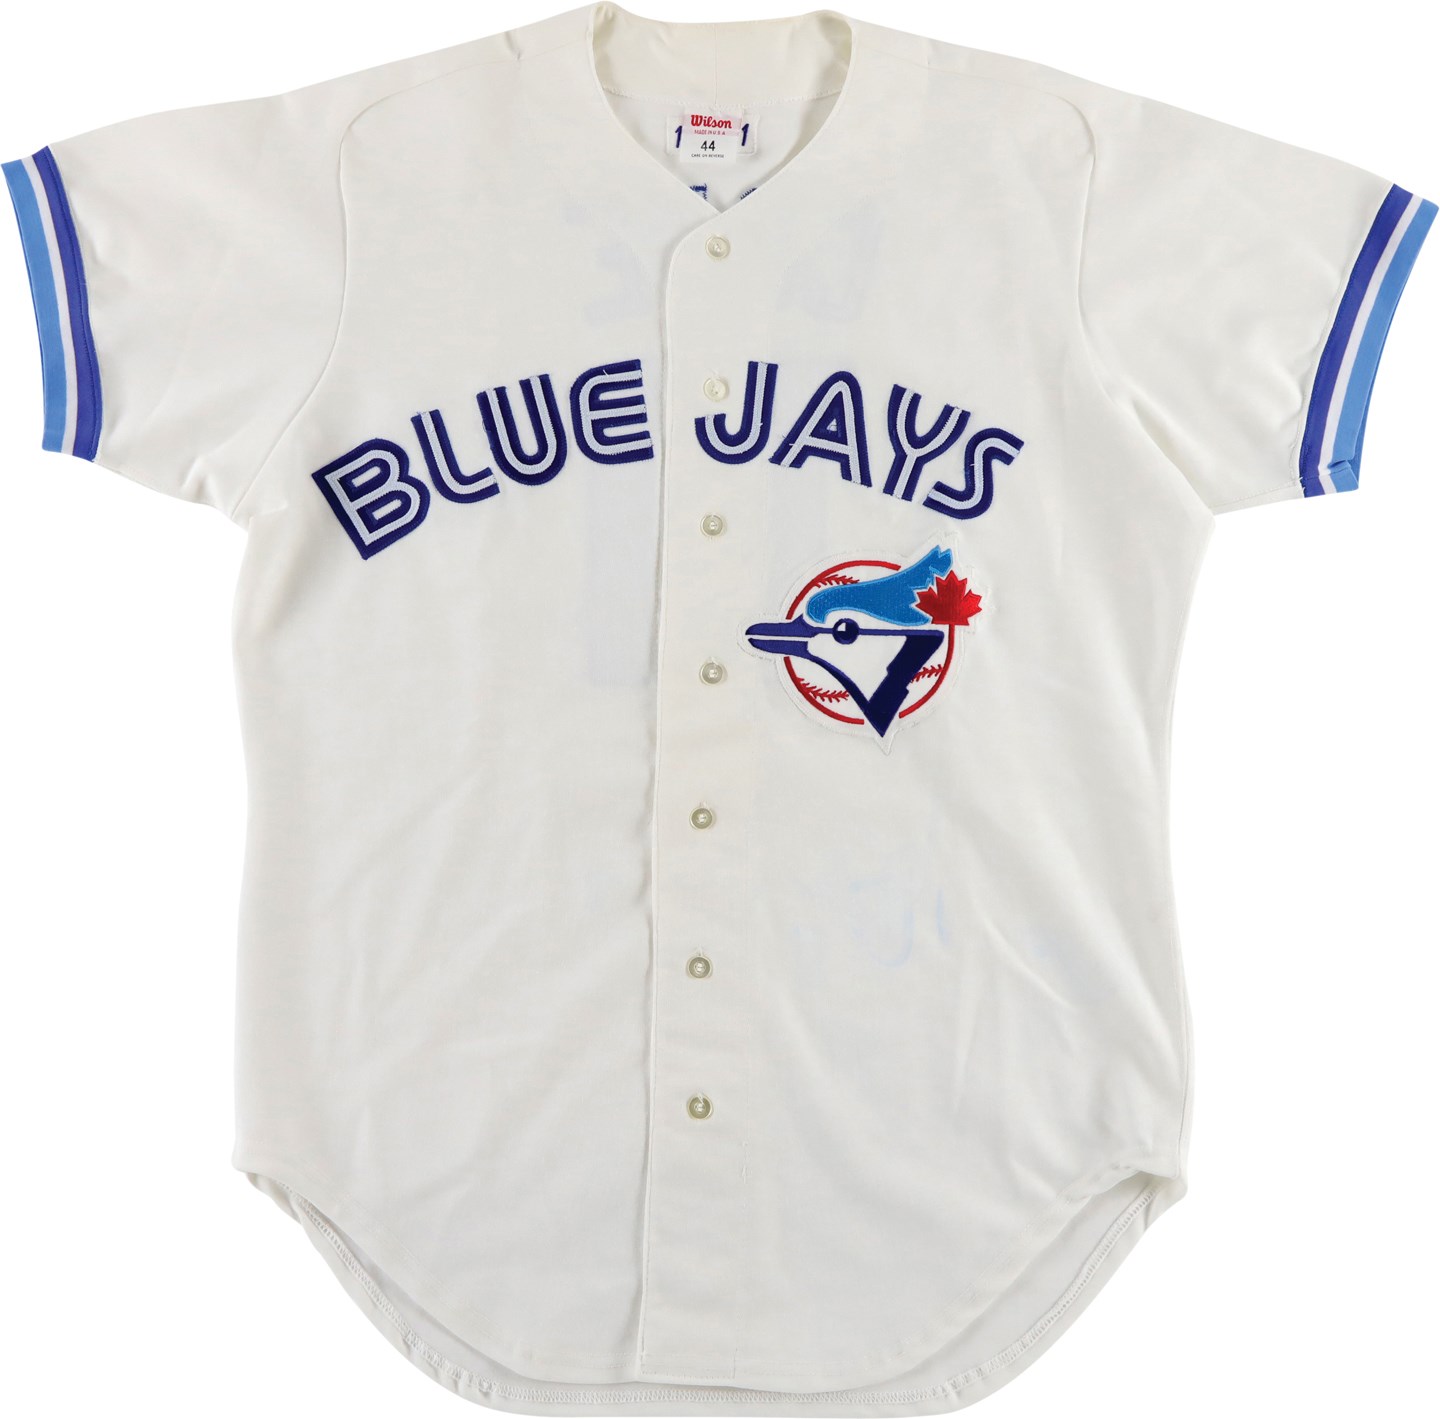 - 1995 David Cone Toronto Blue Jays Signed Game Worn Jersey Given to Cito Gaston